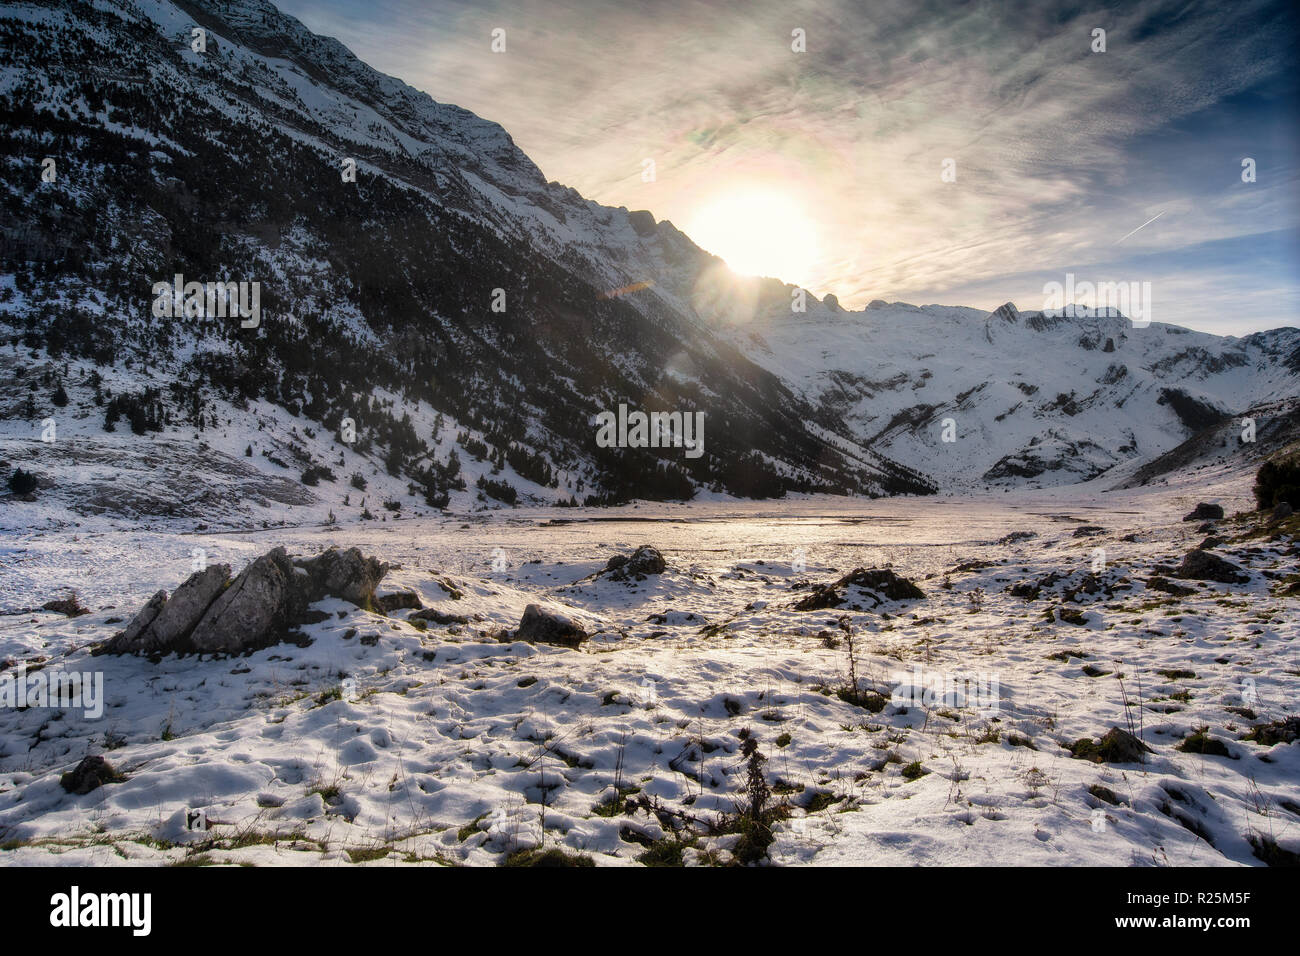 Otal valley at sunset, Huesca, Pyrenees. Stock Photo